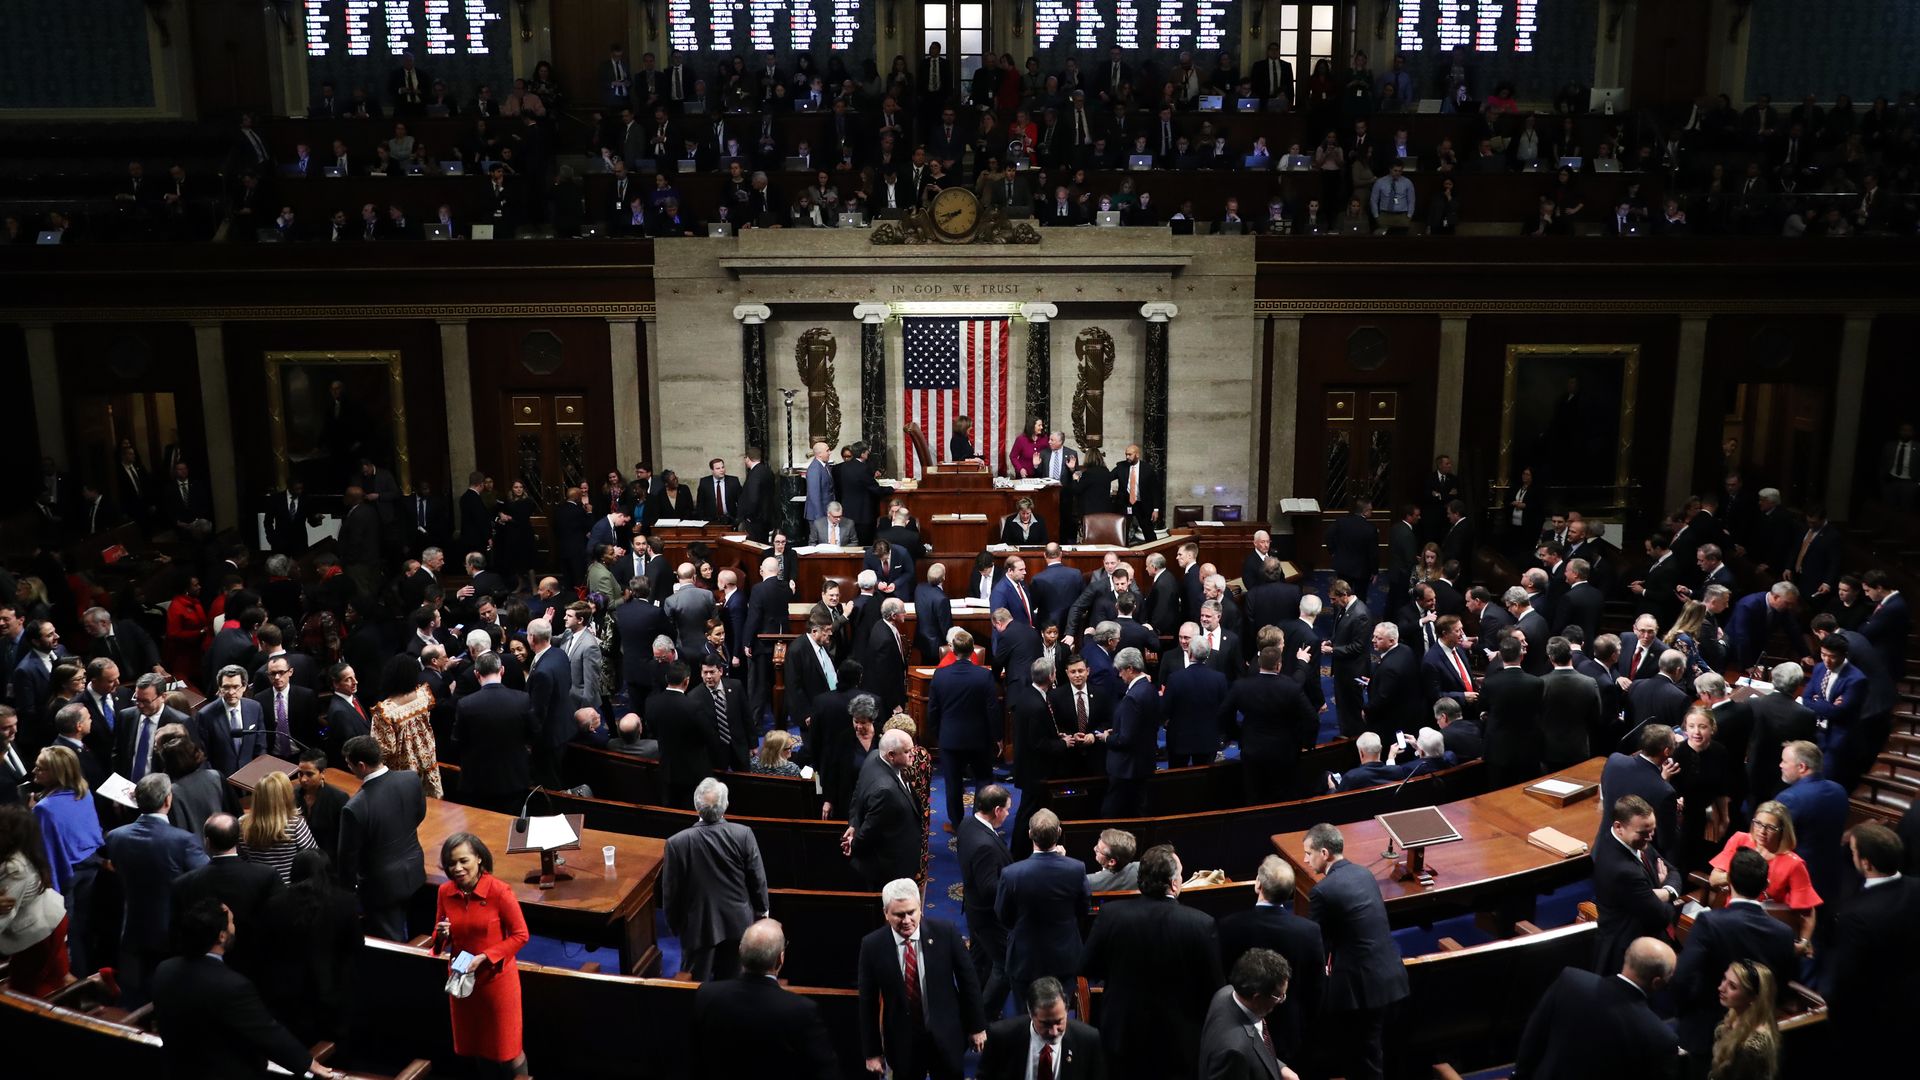 The House chamber.